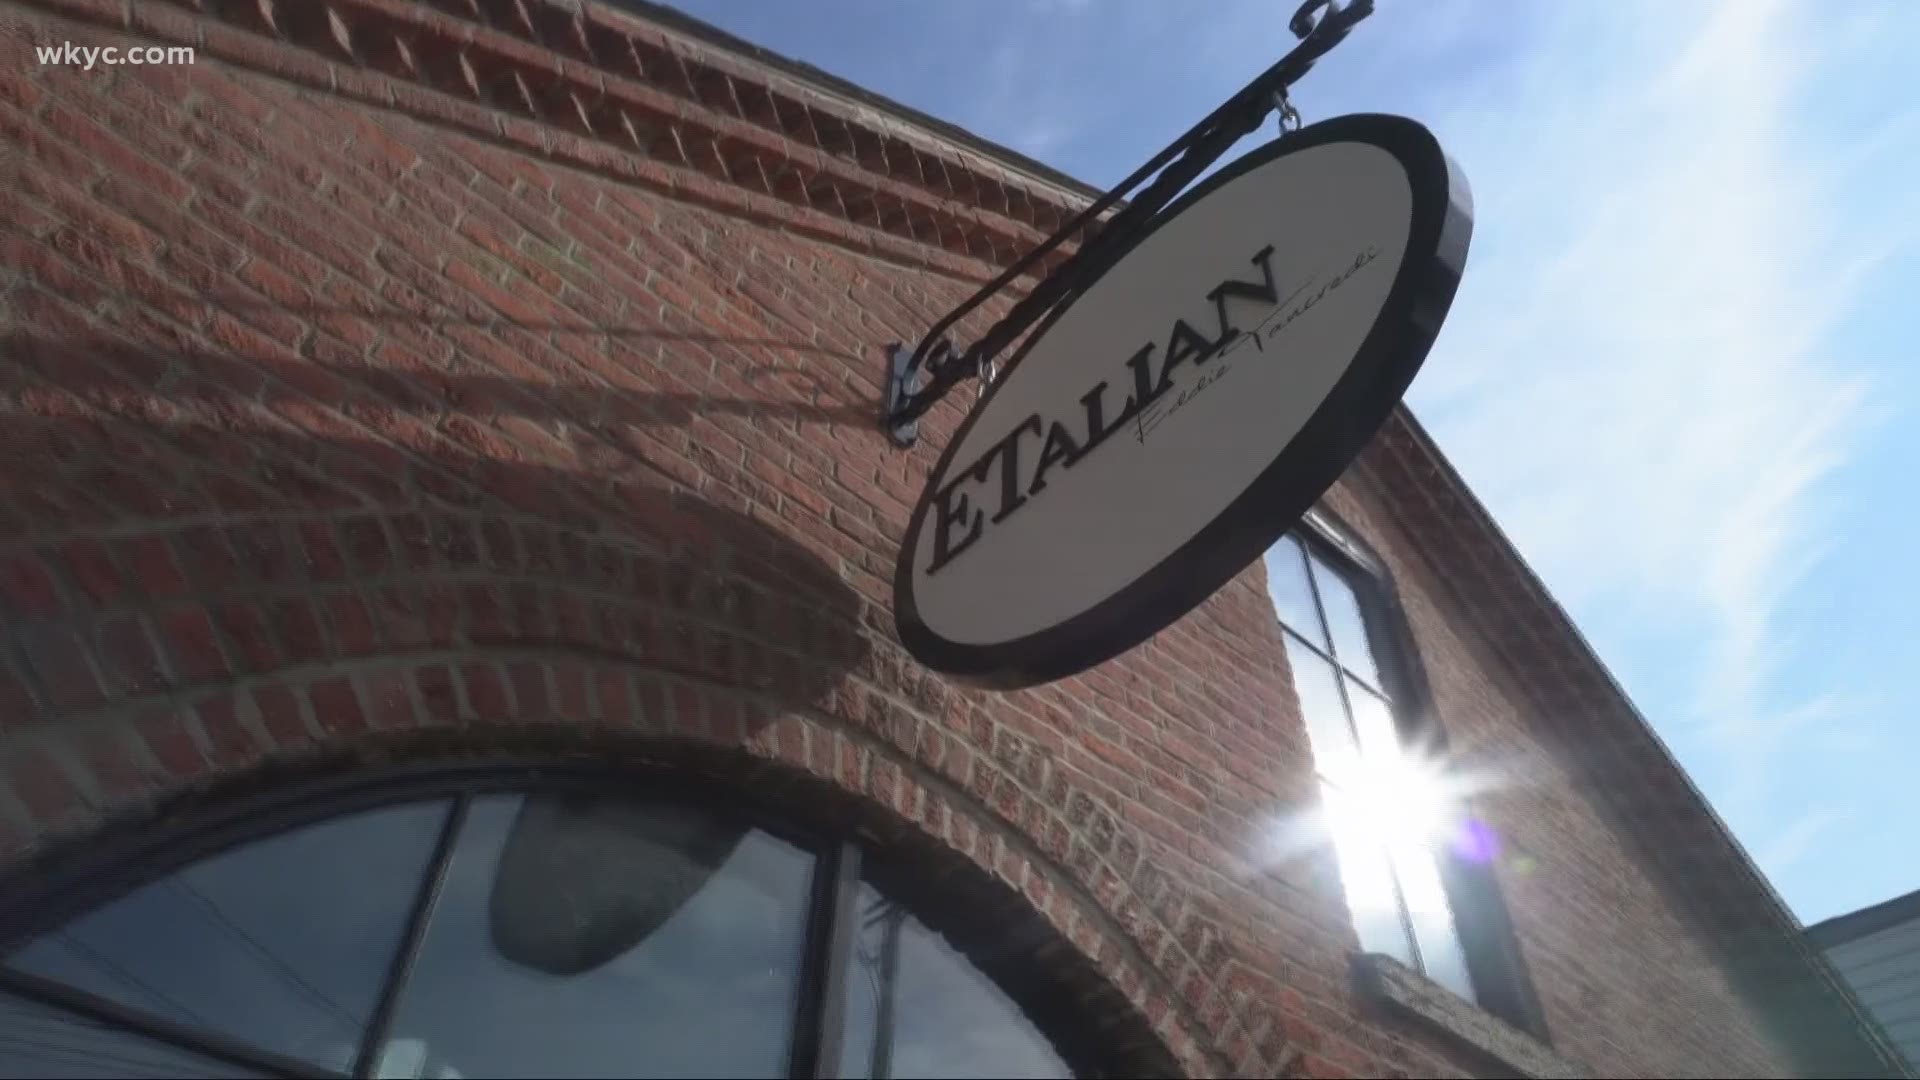 Welcome to Etalian, a pizza restaurant under construction in Chagrin Falls. Its owner is evolving his business model to meet customer and employee demands.